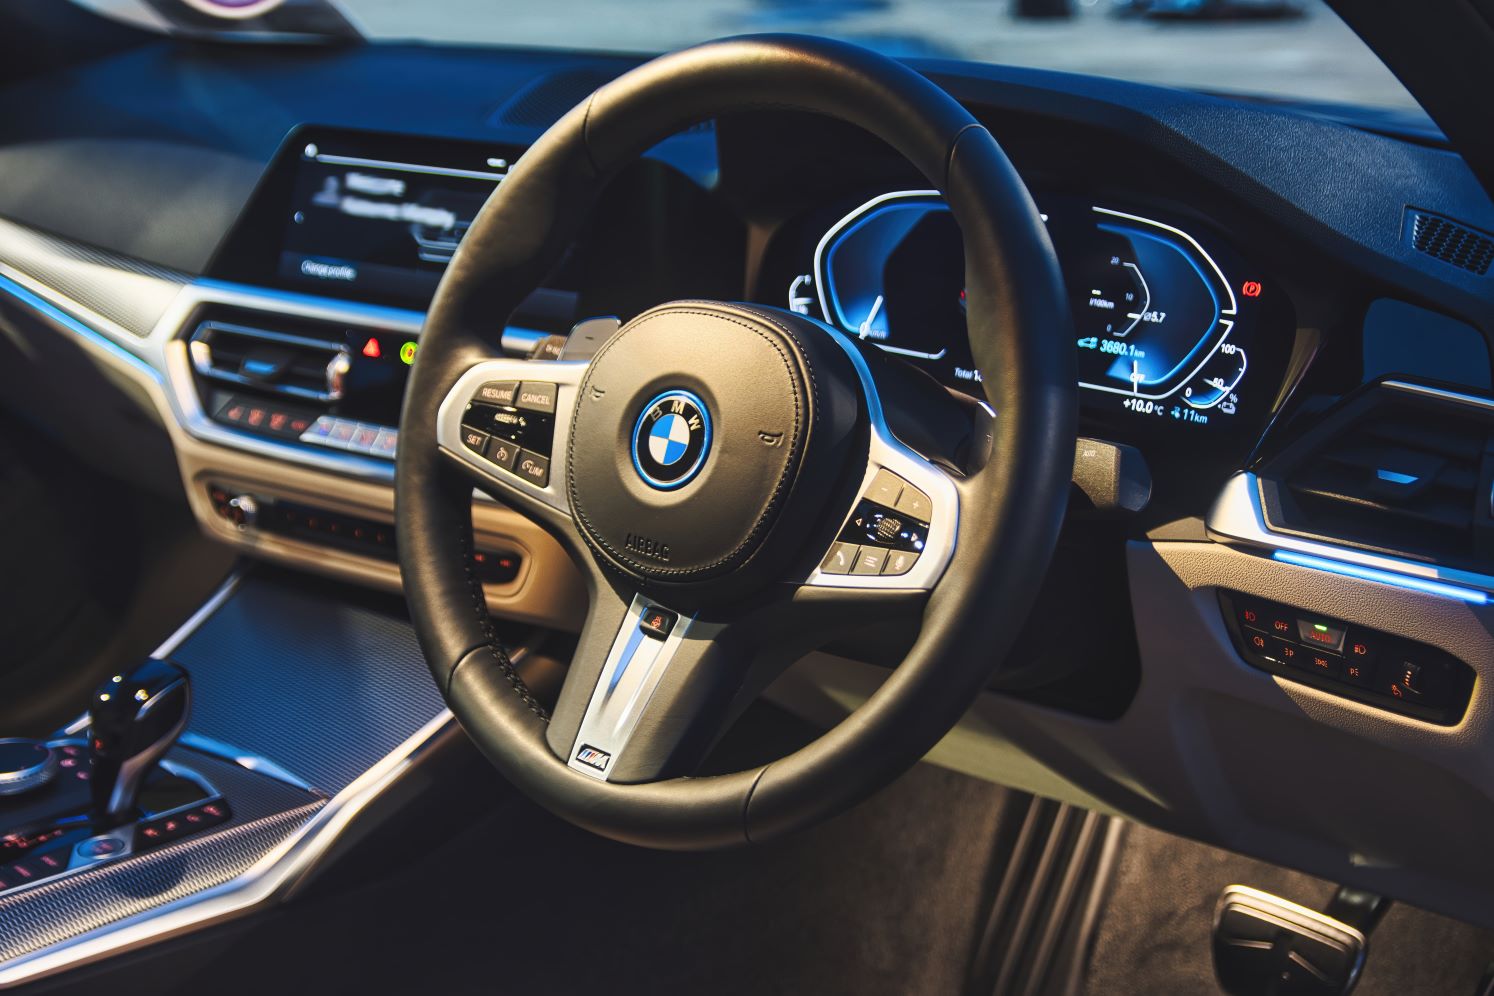 Image of a BMW steering wheel